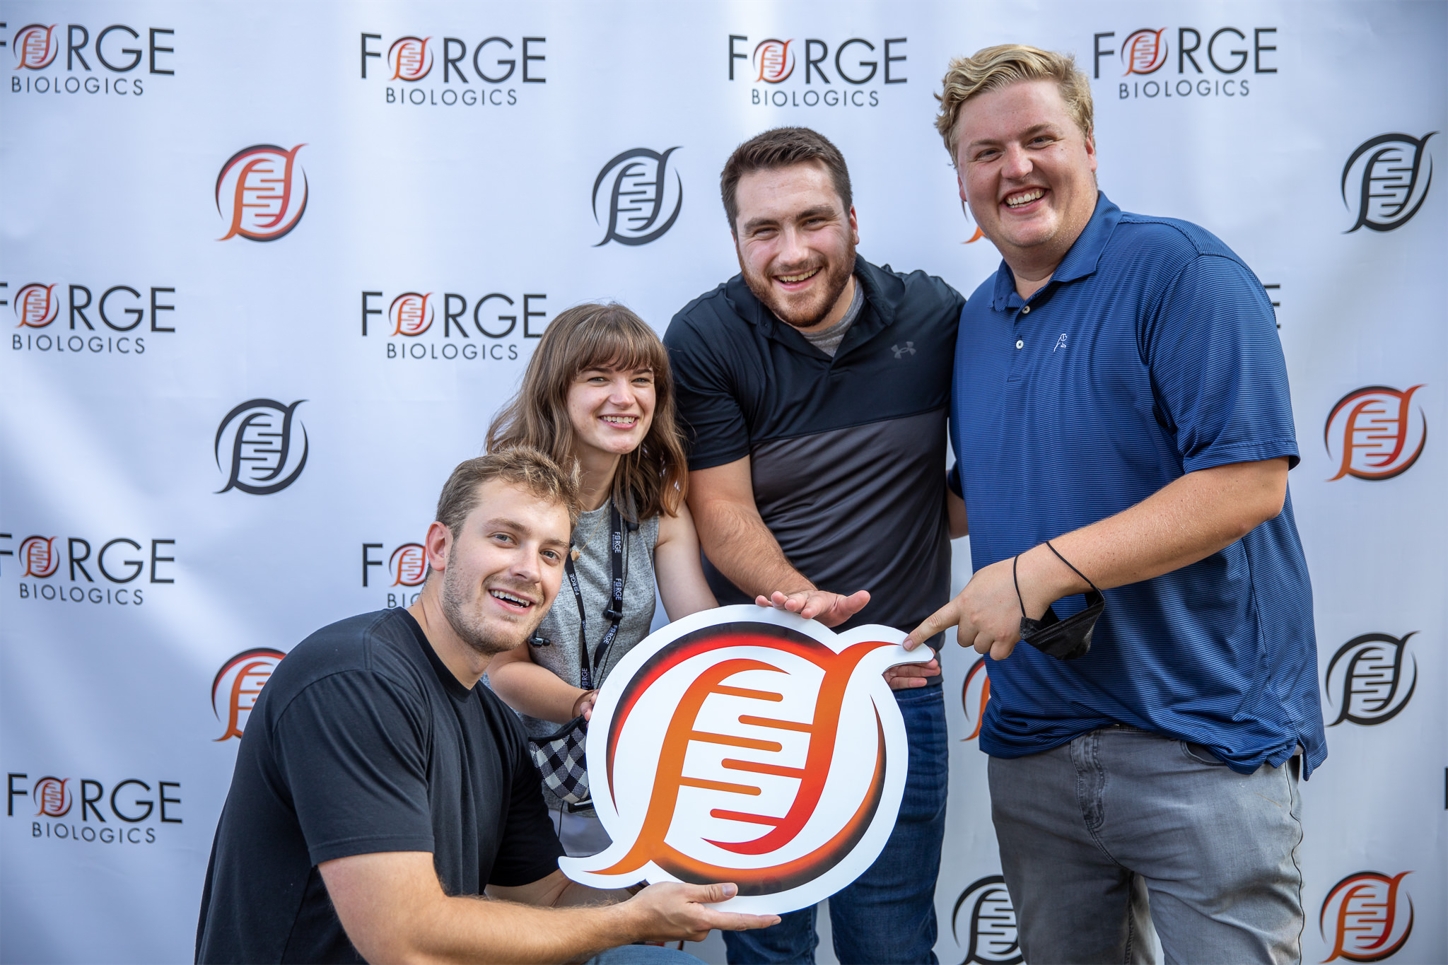 Forge team members celebrating at a Family & Friends event